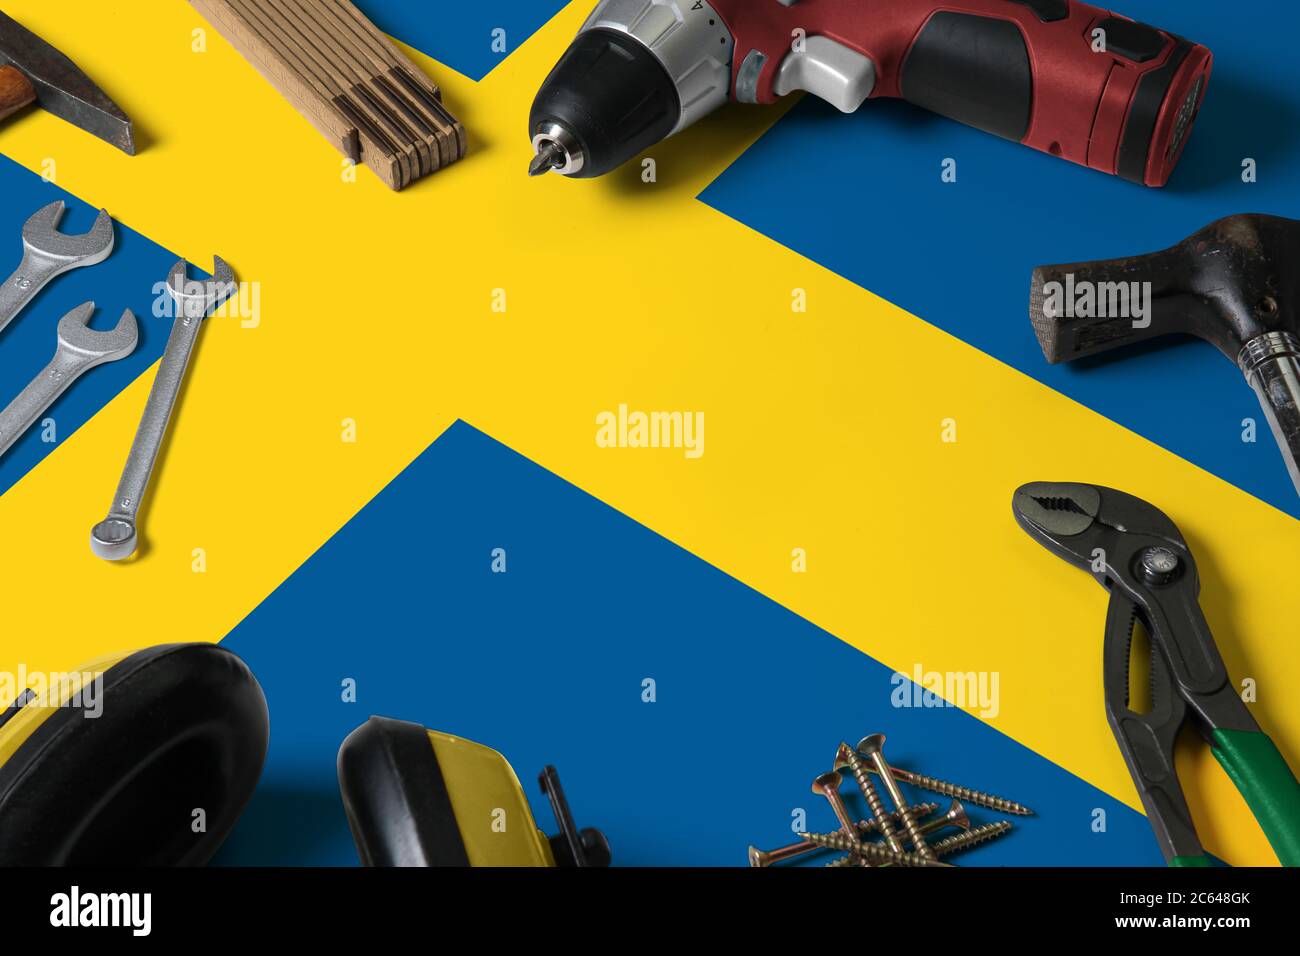 Sweden flag on repair tool concept wooden table background. Mechanical service theme with national objects. Stock Photo